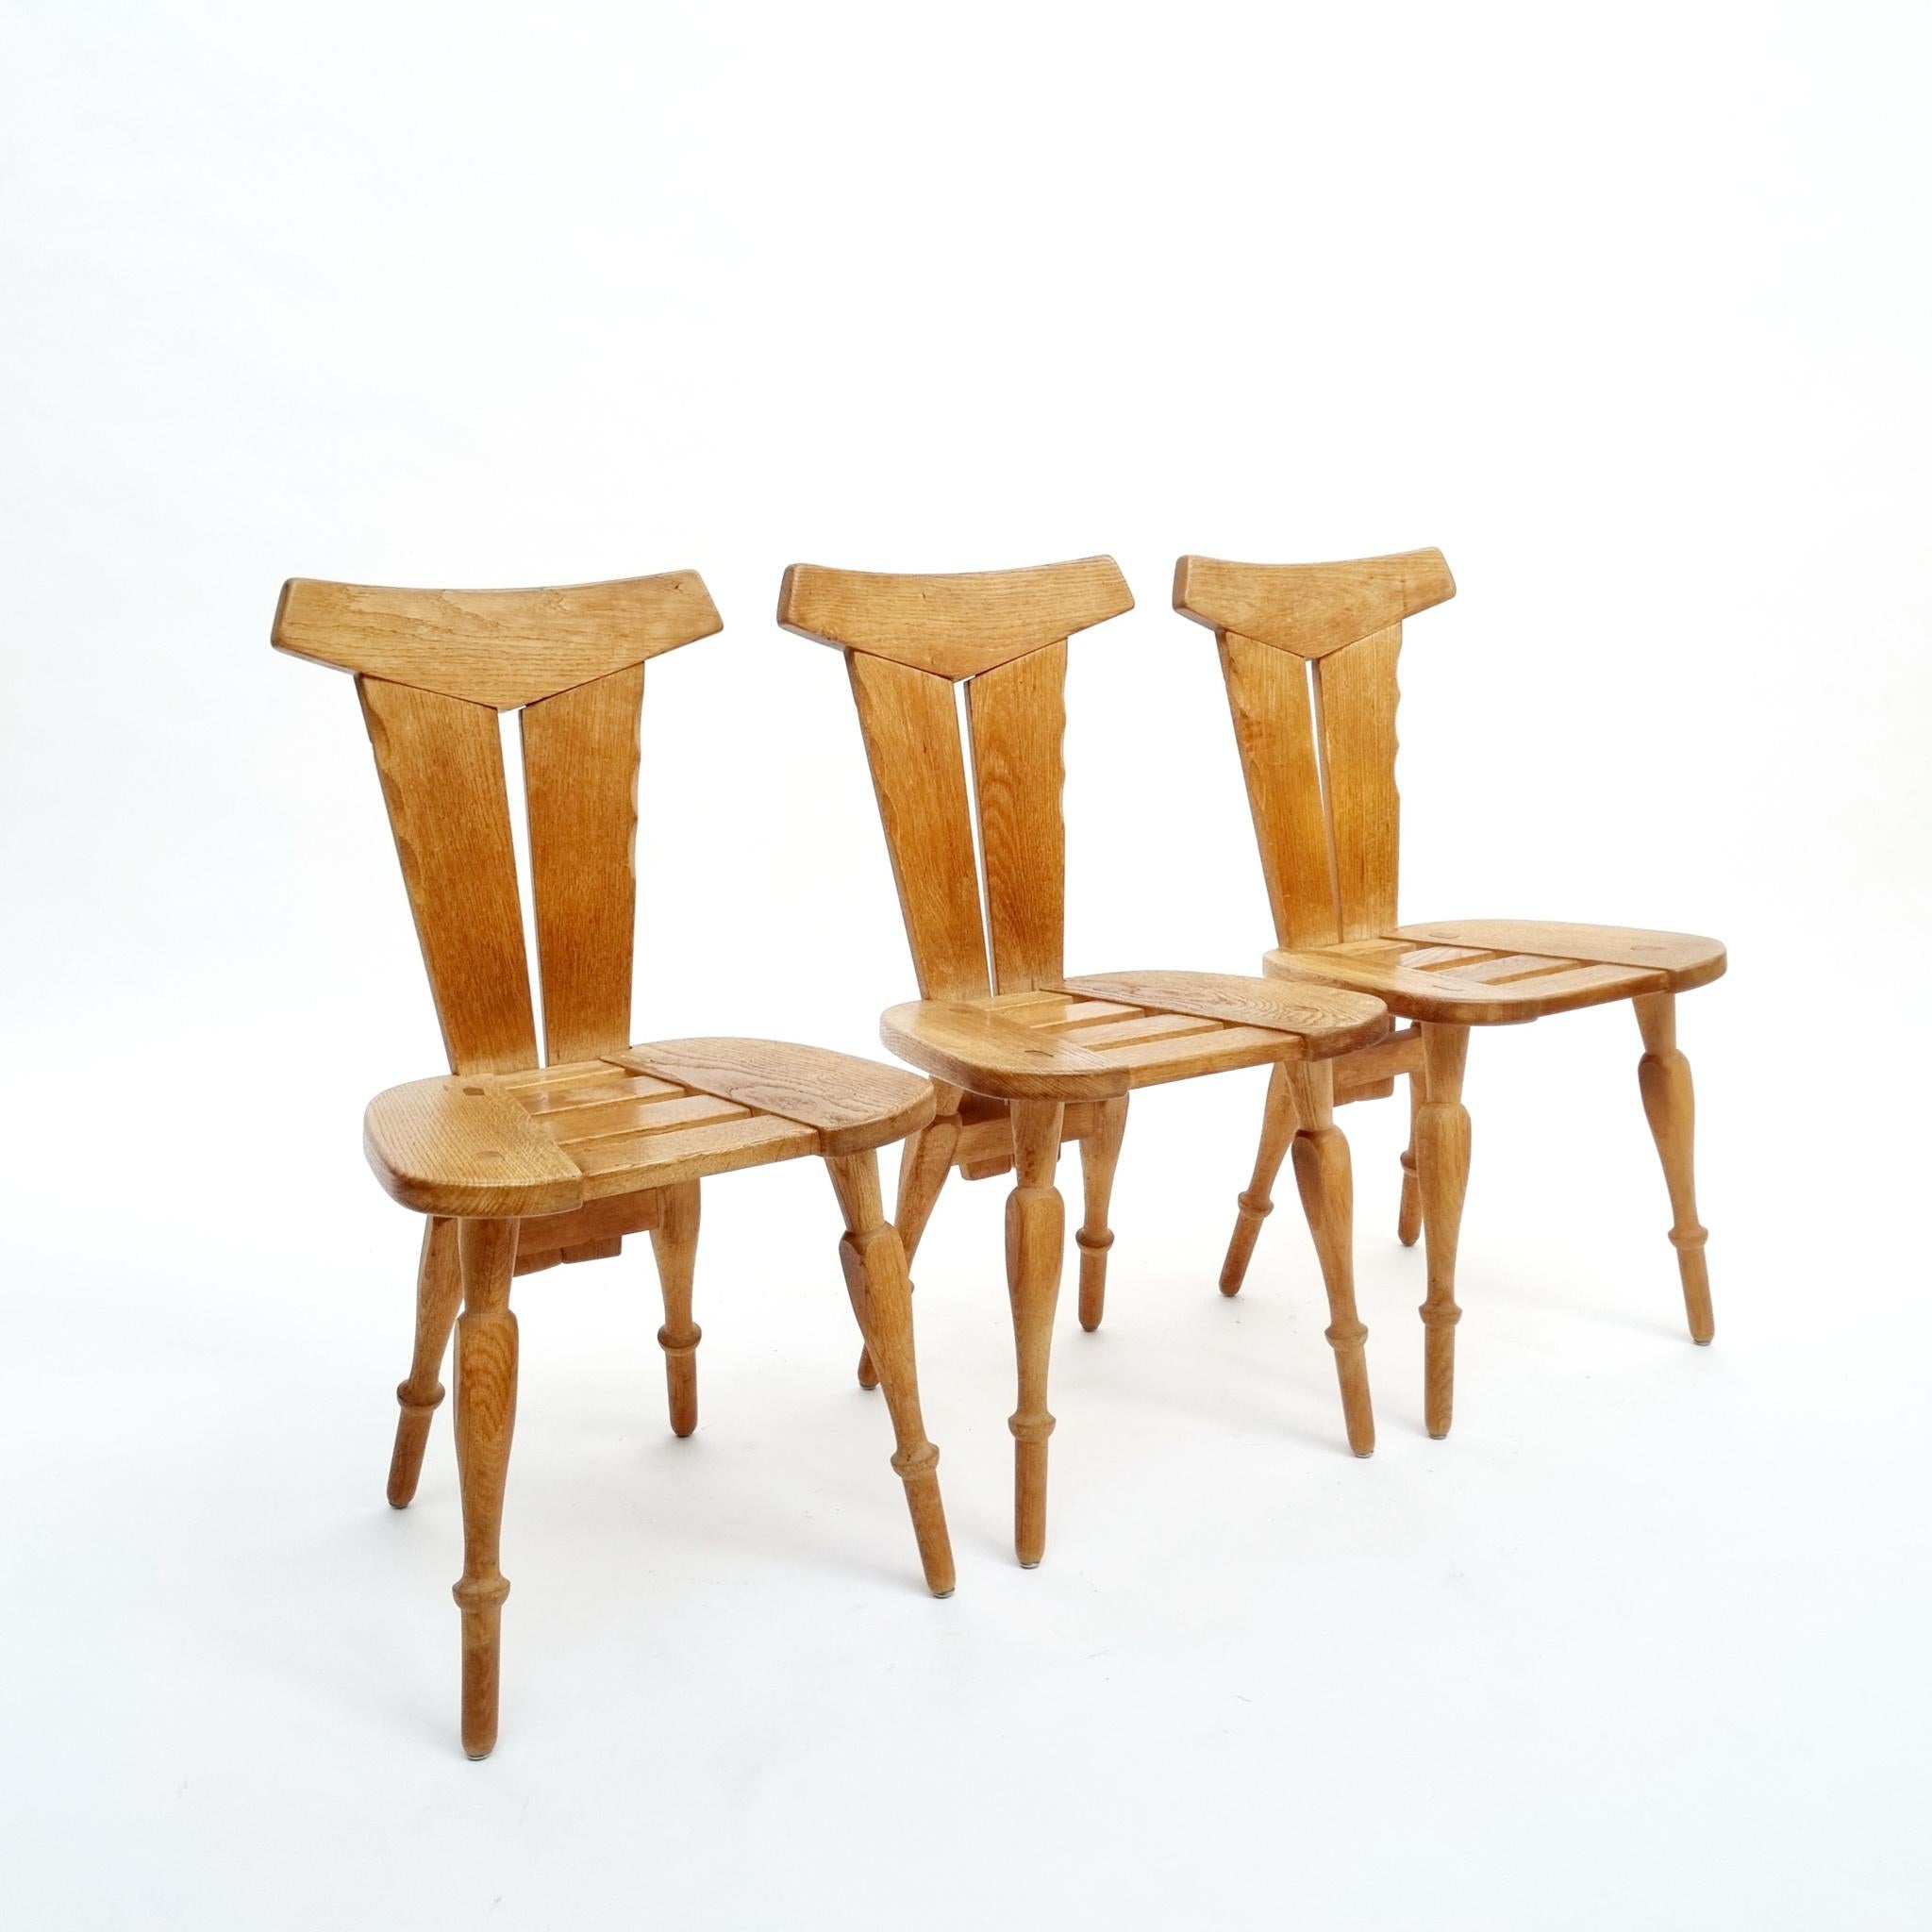 A set of mid-century brutalist dining chairs. Belgium, c1960s.